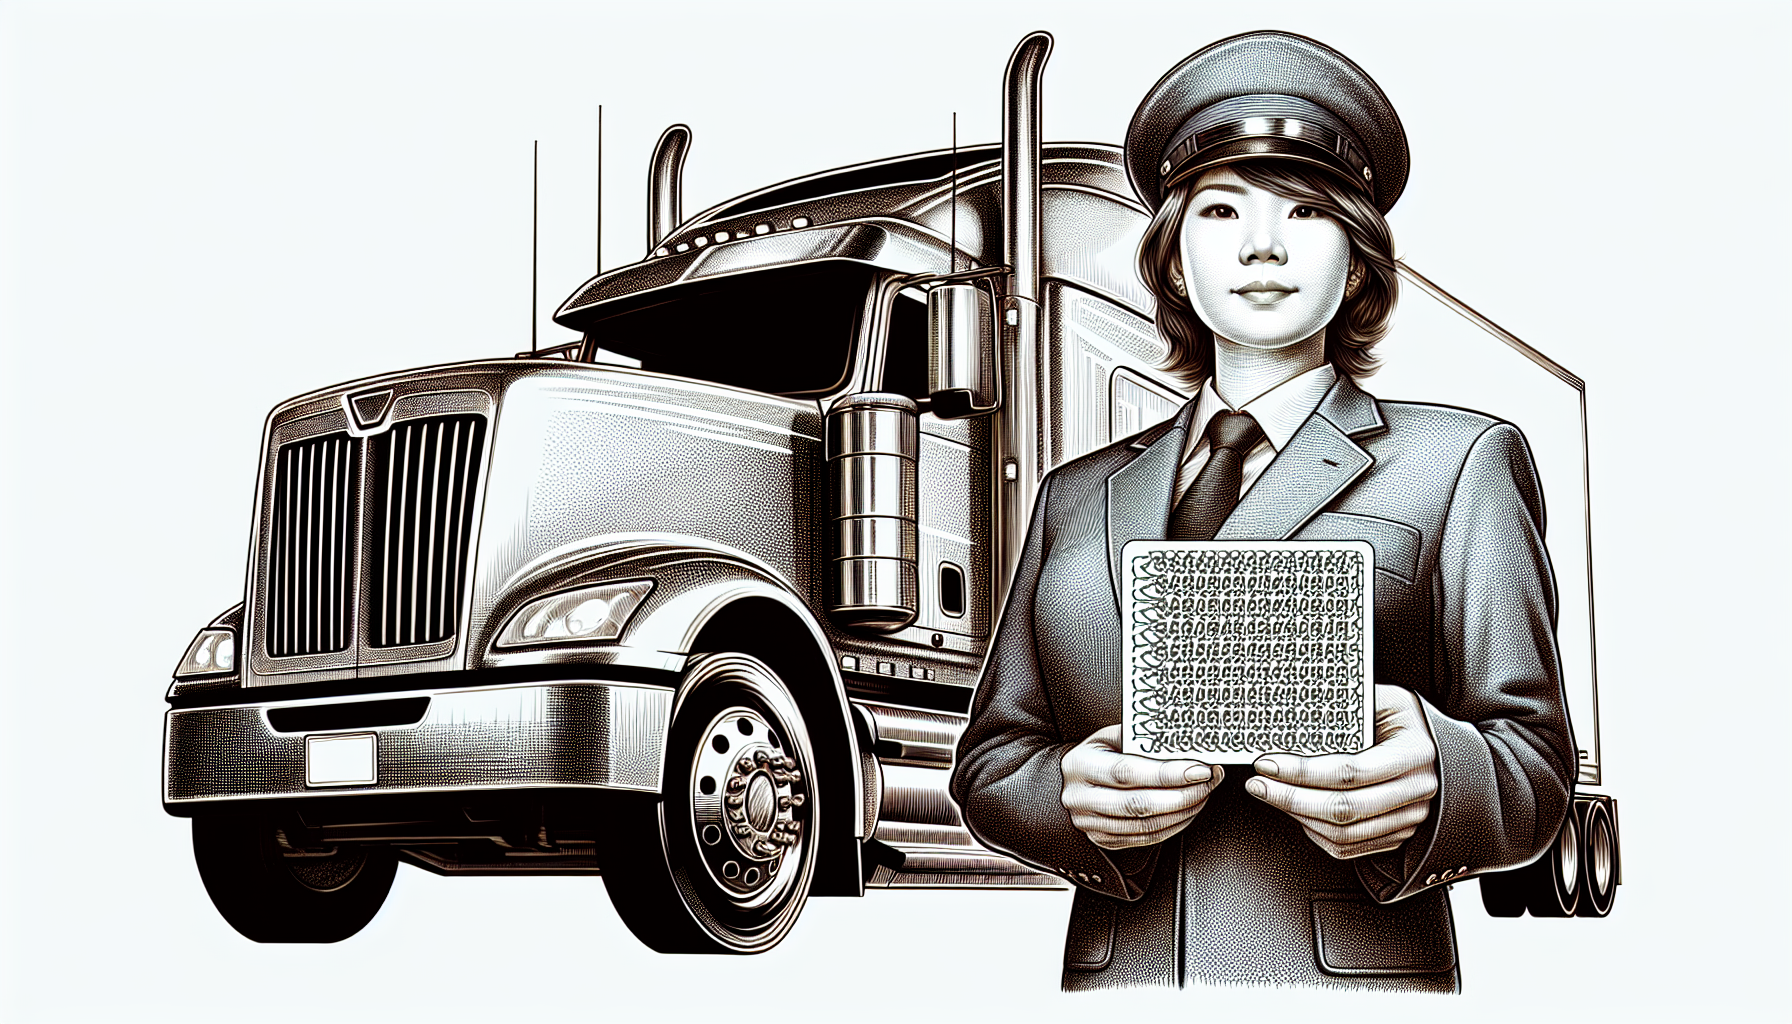 Illustration of a commercial driver holding a 3-month DOT medical card